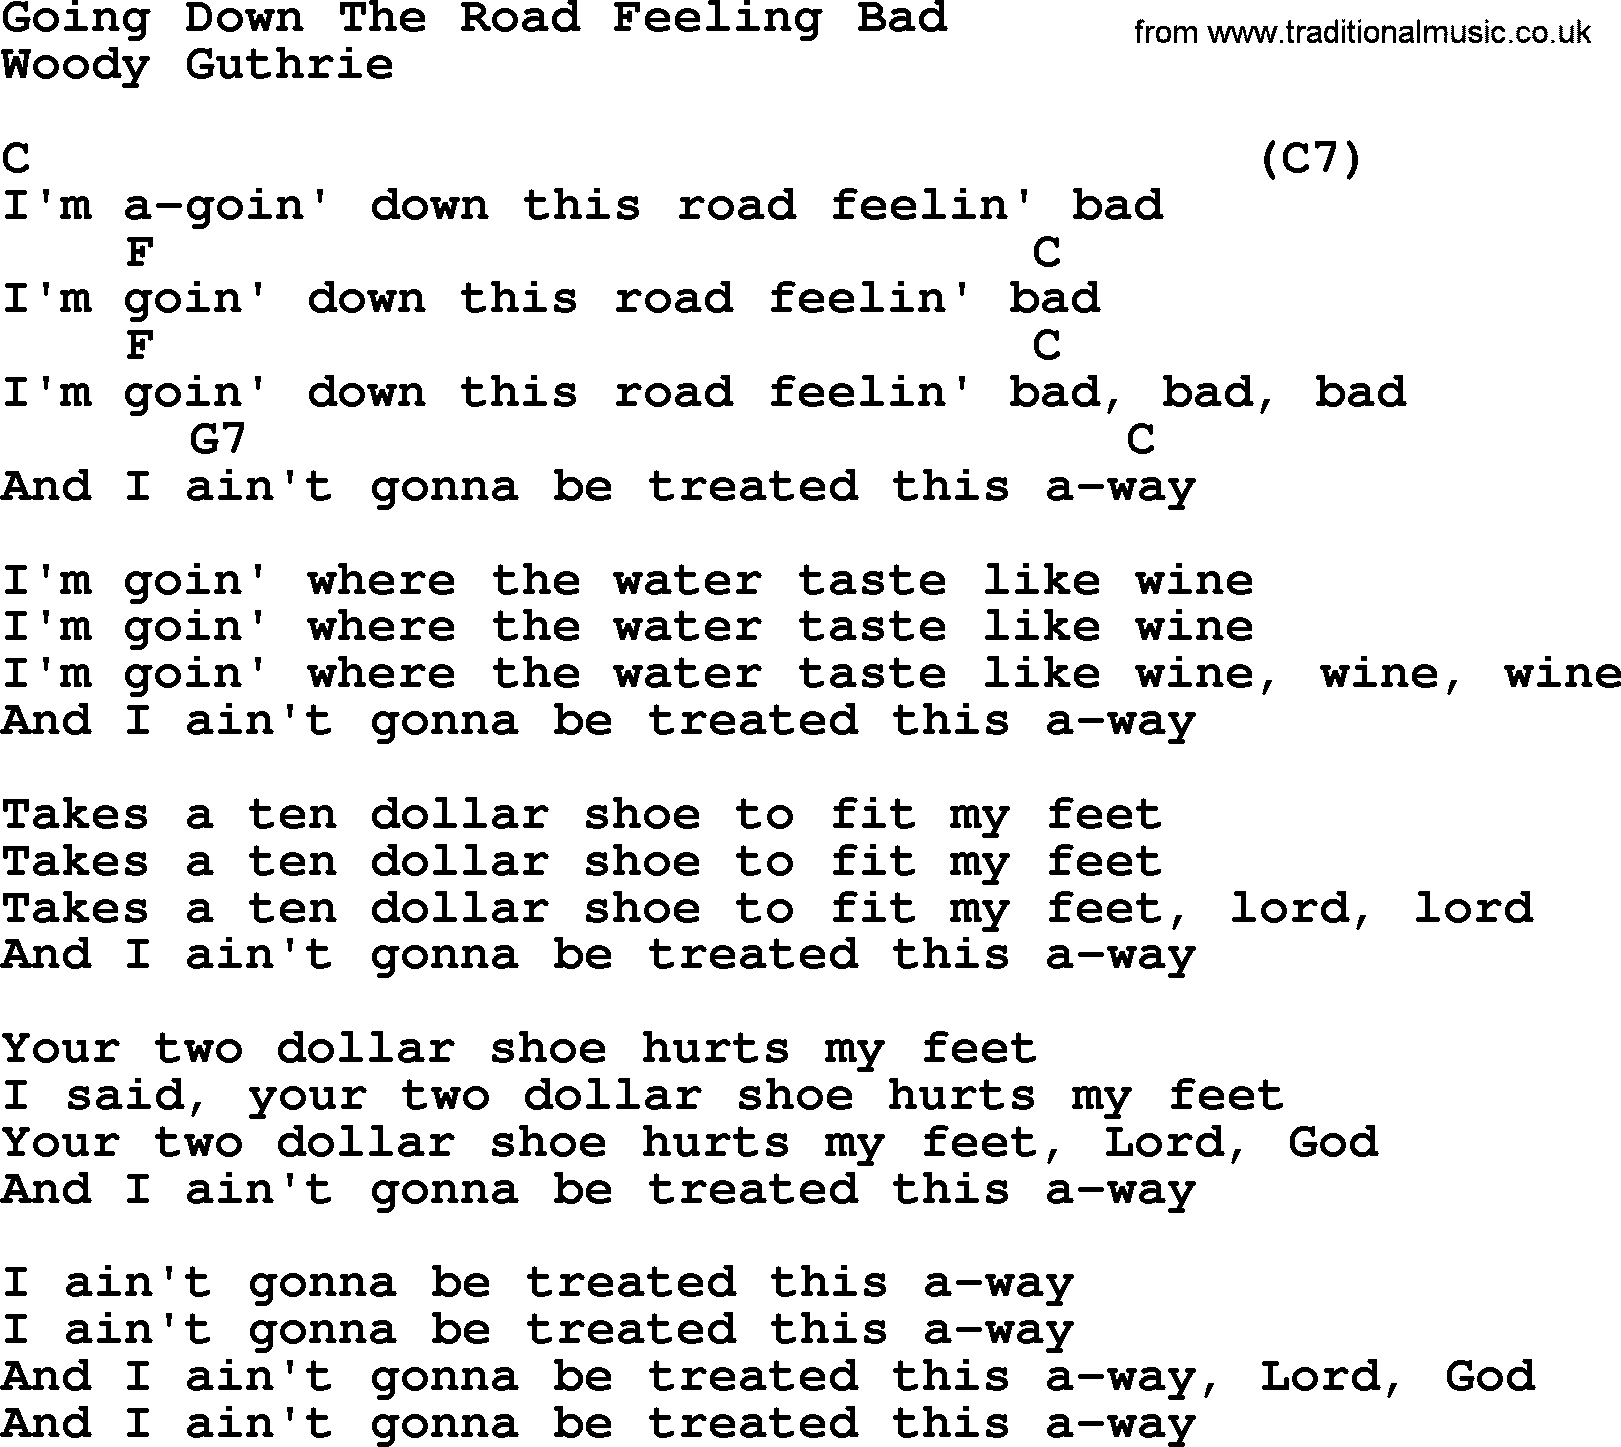 Top 1000 Most Popular Folk and Old-time Songs: Going Down The Road Feeling Bad, lyrics and chords